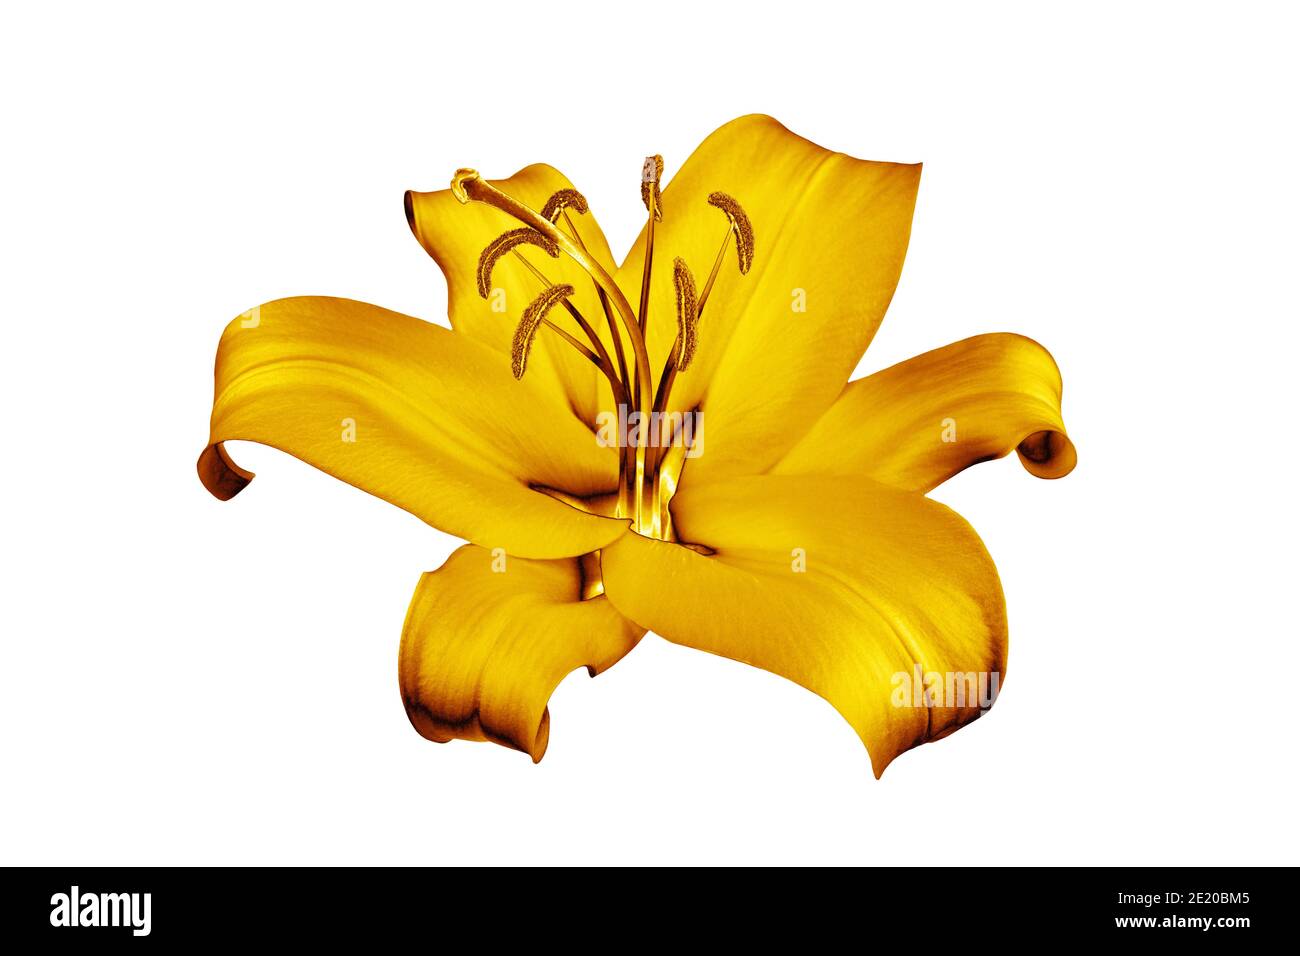 One golden lily flower white background isolated close up, beautiful single  gold metal lilly, shiny yellow metallic floral pattern, design element  Stock Photo - Alamy